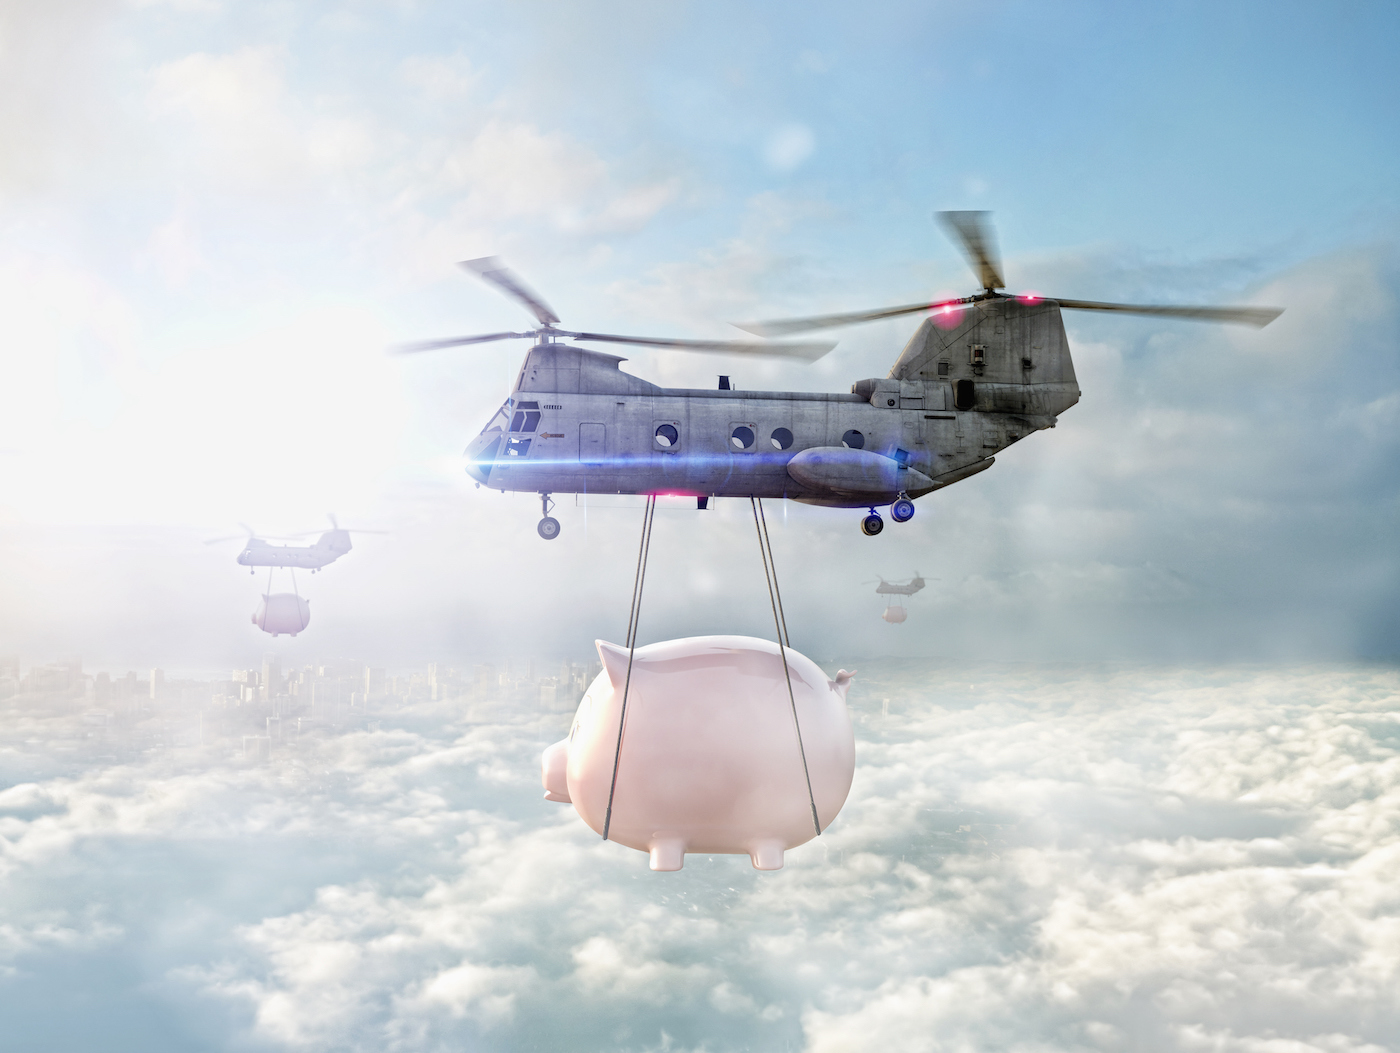 A helicopter carrying a piggy bank above the clouds